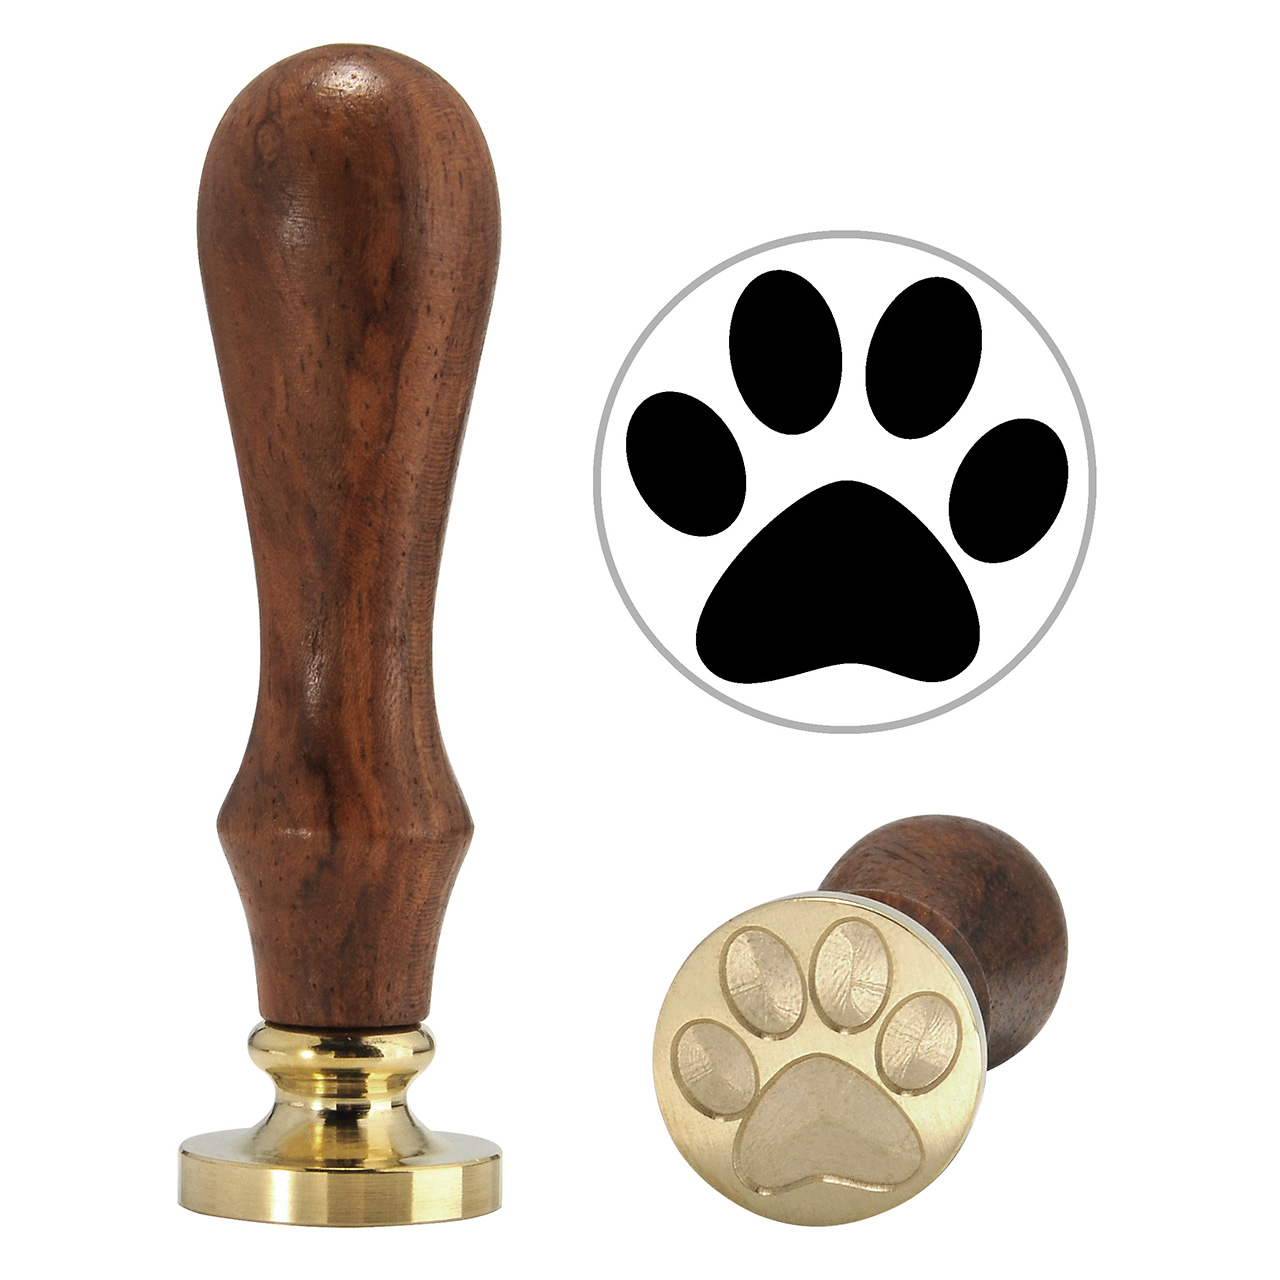 Lovely Dog Paw Wax Stamp, Yoption Vintage Retro Lovely Dog Paw Sealing Wax Seal Stamp, Great for Embellishment of Cards Envelopes, Invitations, Wine Packages, Gift Idea (Dog Paw)